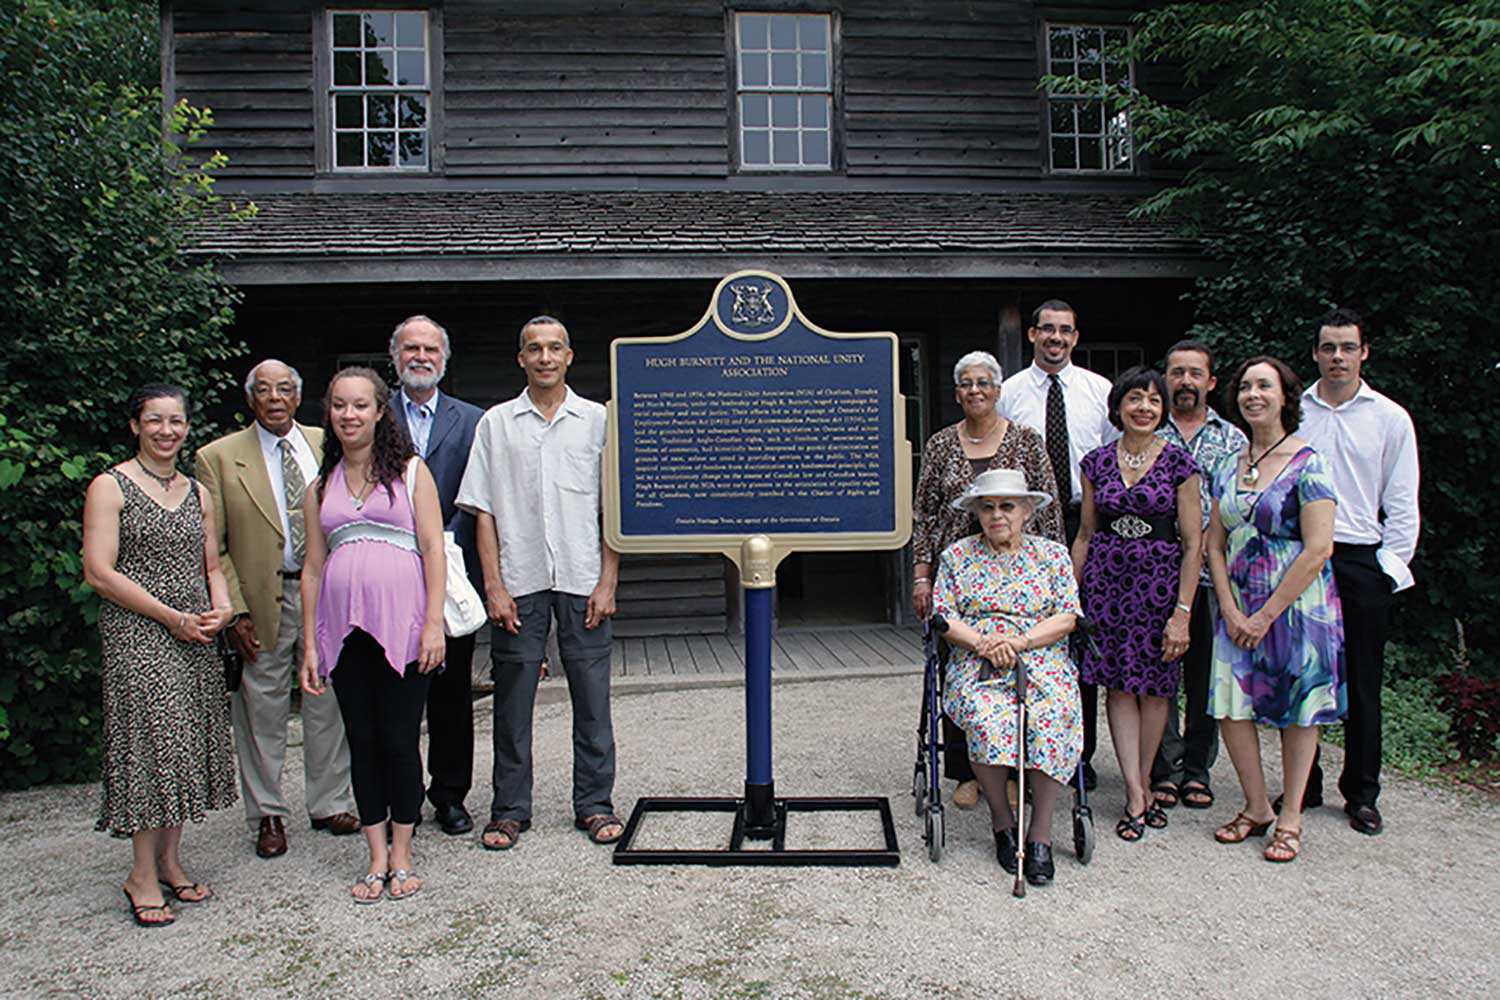 A provincial plaque was unveiled in 2010 as part of the Emancipation Day event at Uncle Tom’s Cabin Historic Site in Dresden to commemorate ﻿Hugh Burnett and the National Unity Association.